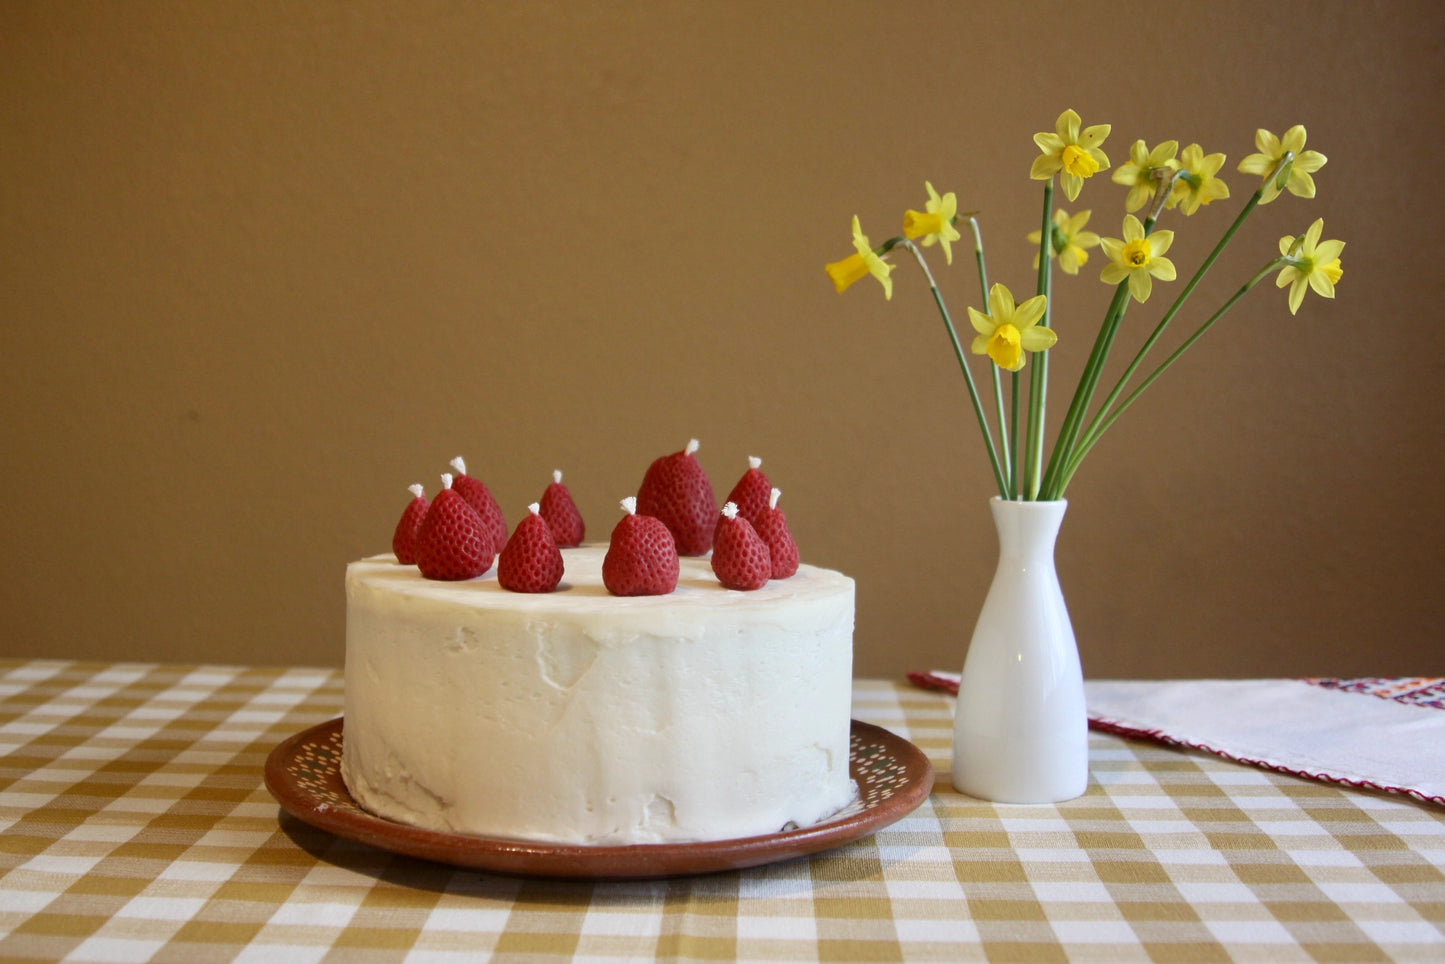 Strawberry candles on a cake with cotton wicks. Not lit.